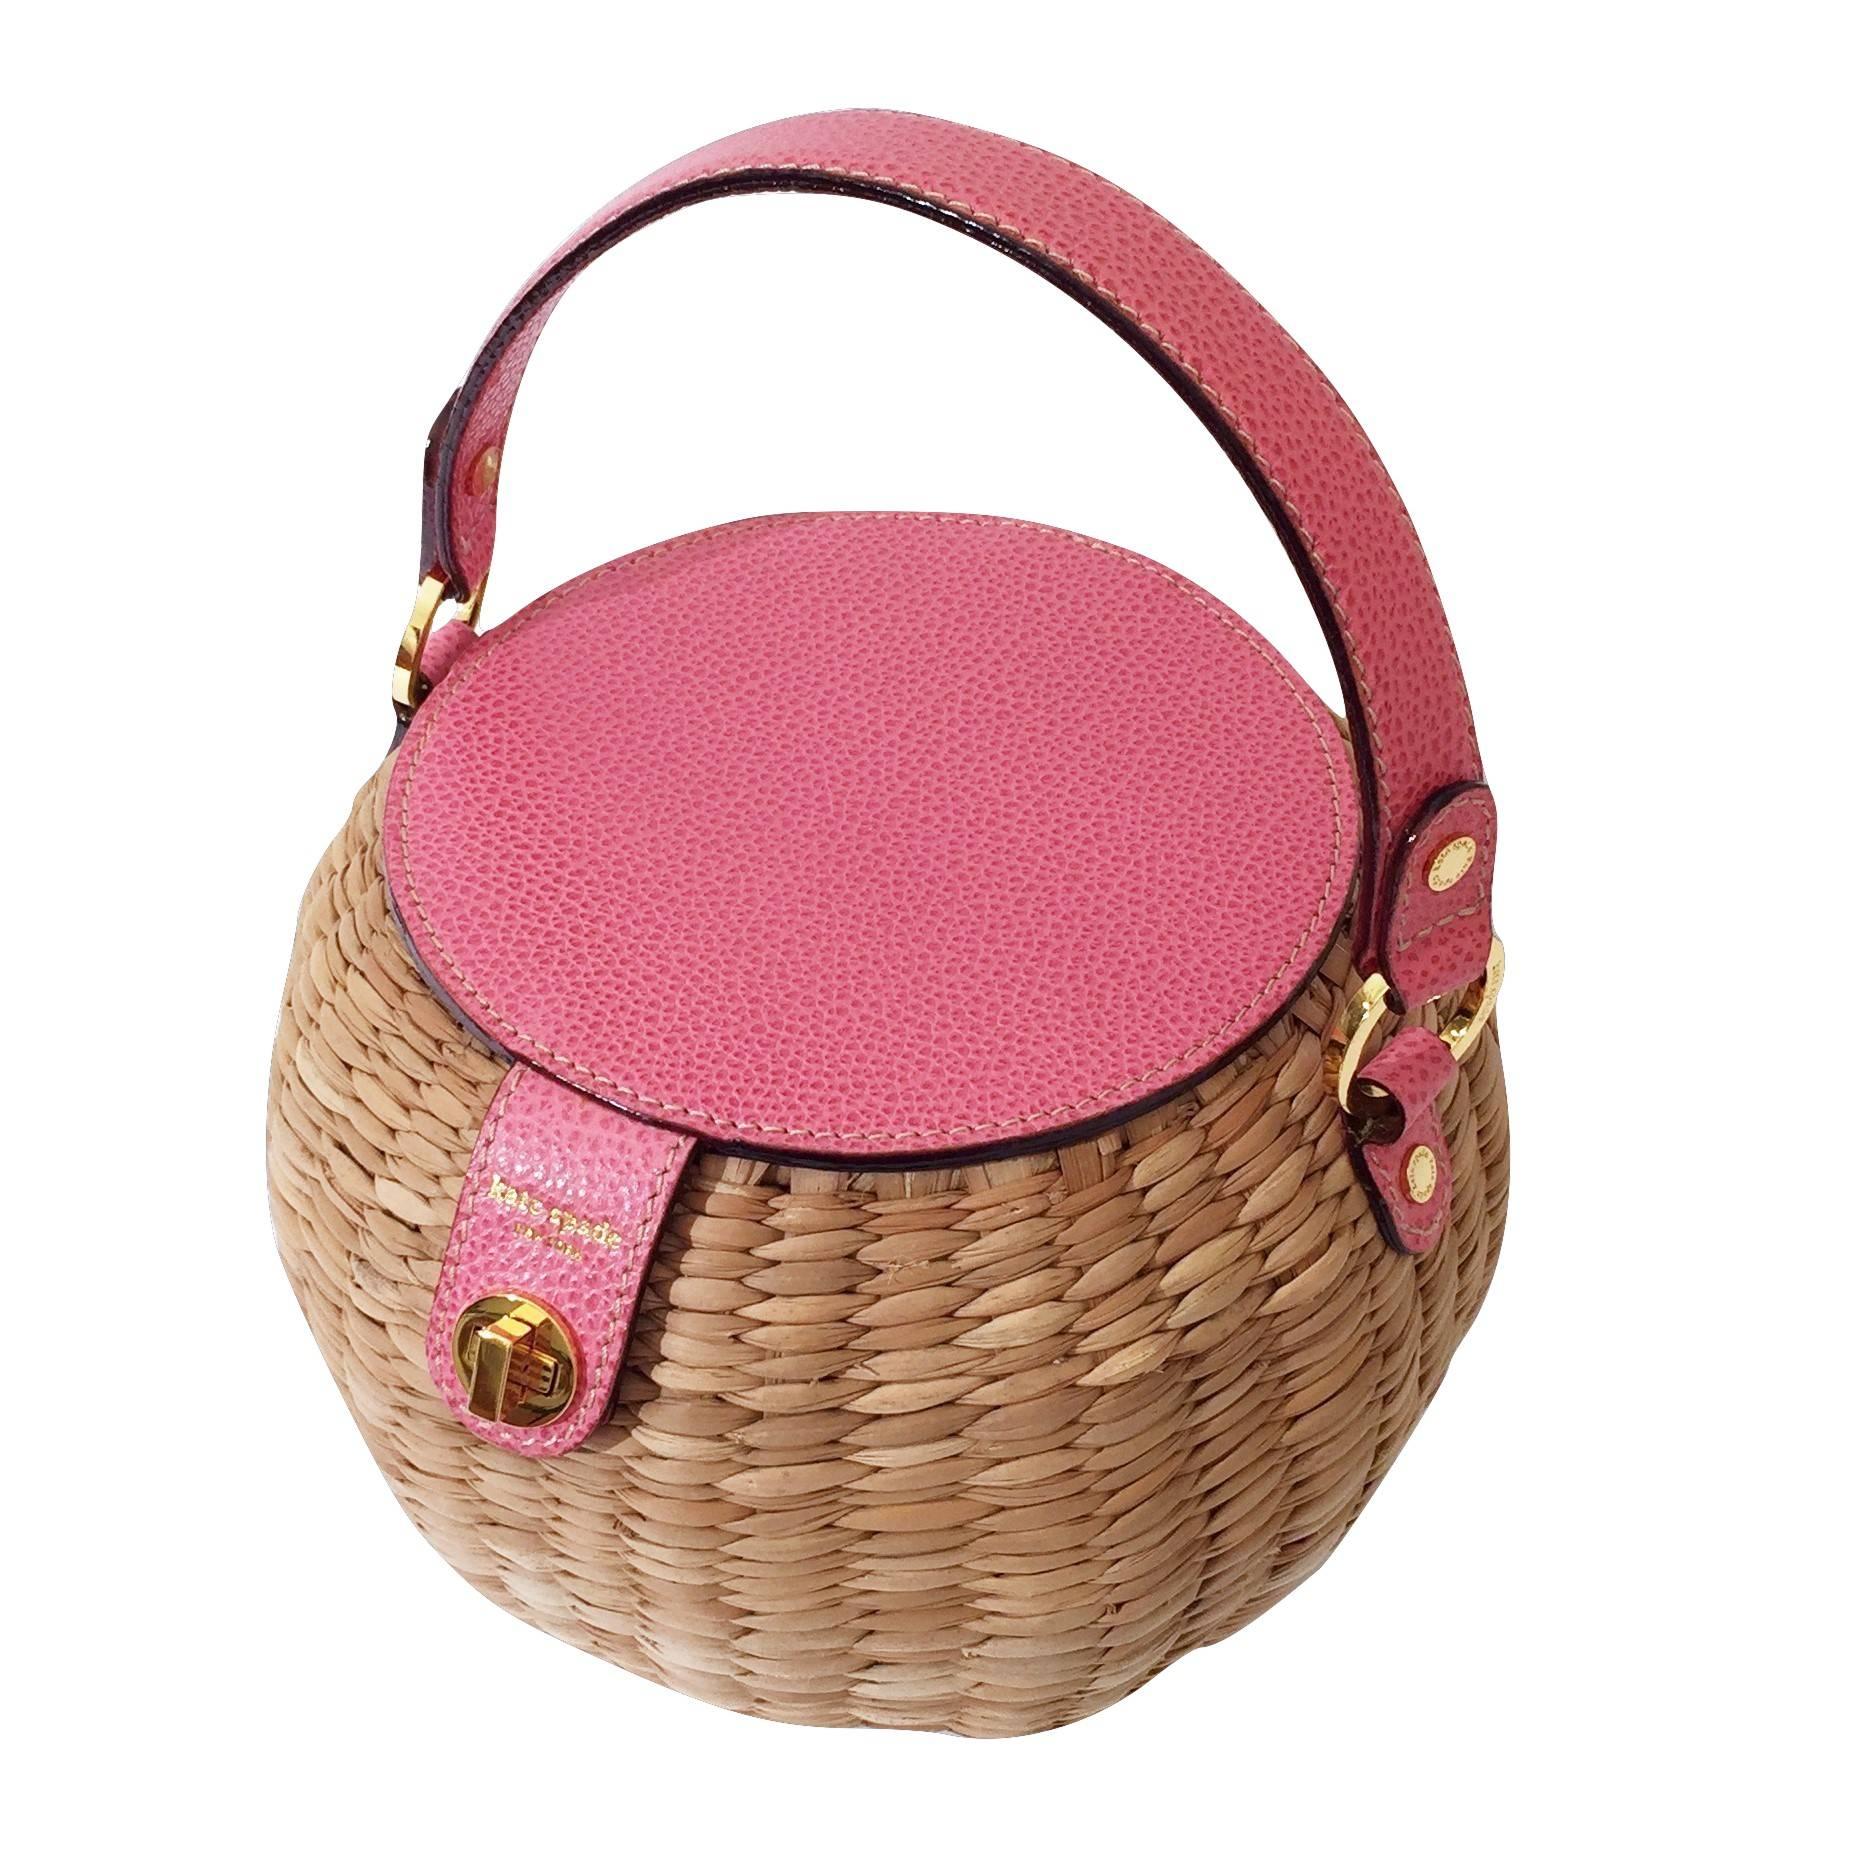 New Spring 2005 Collection Kate Spade Pink Wicker Basket Bag With Box & Tags 9